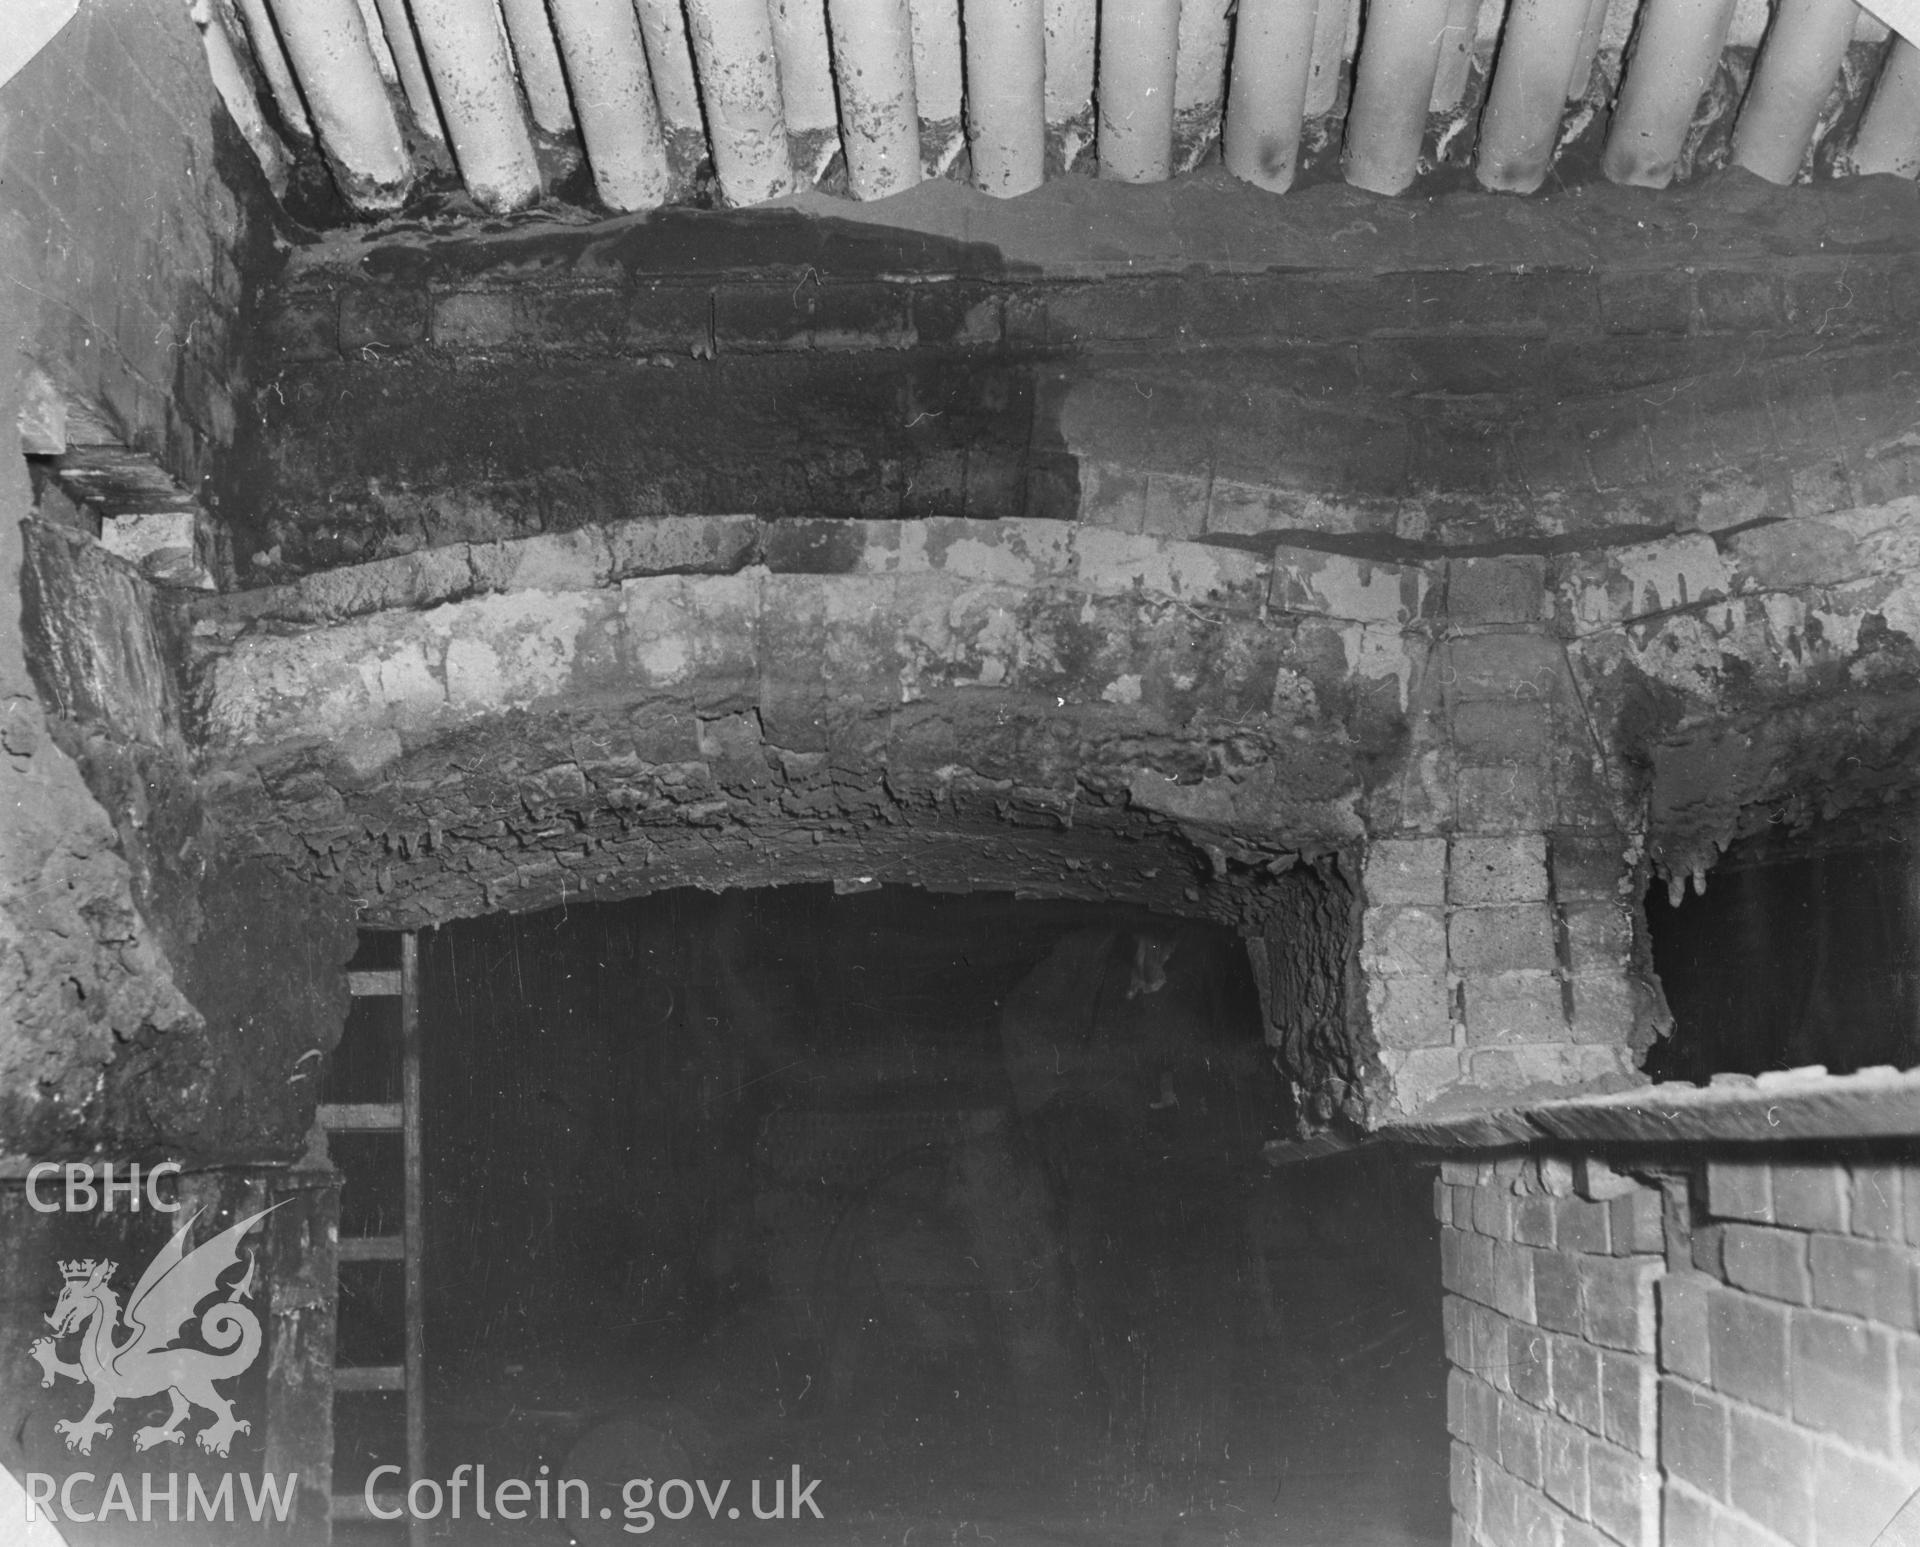 Black and white acetate negative showing interior view of an unidentified building in or near Llanelli.